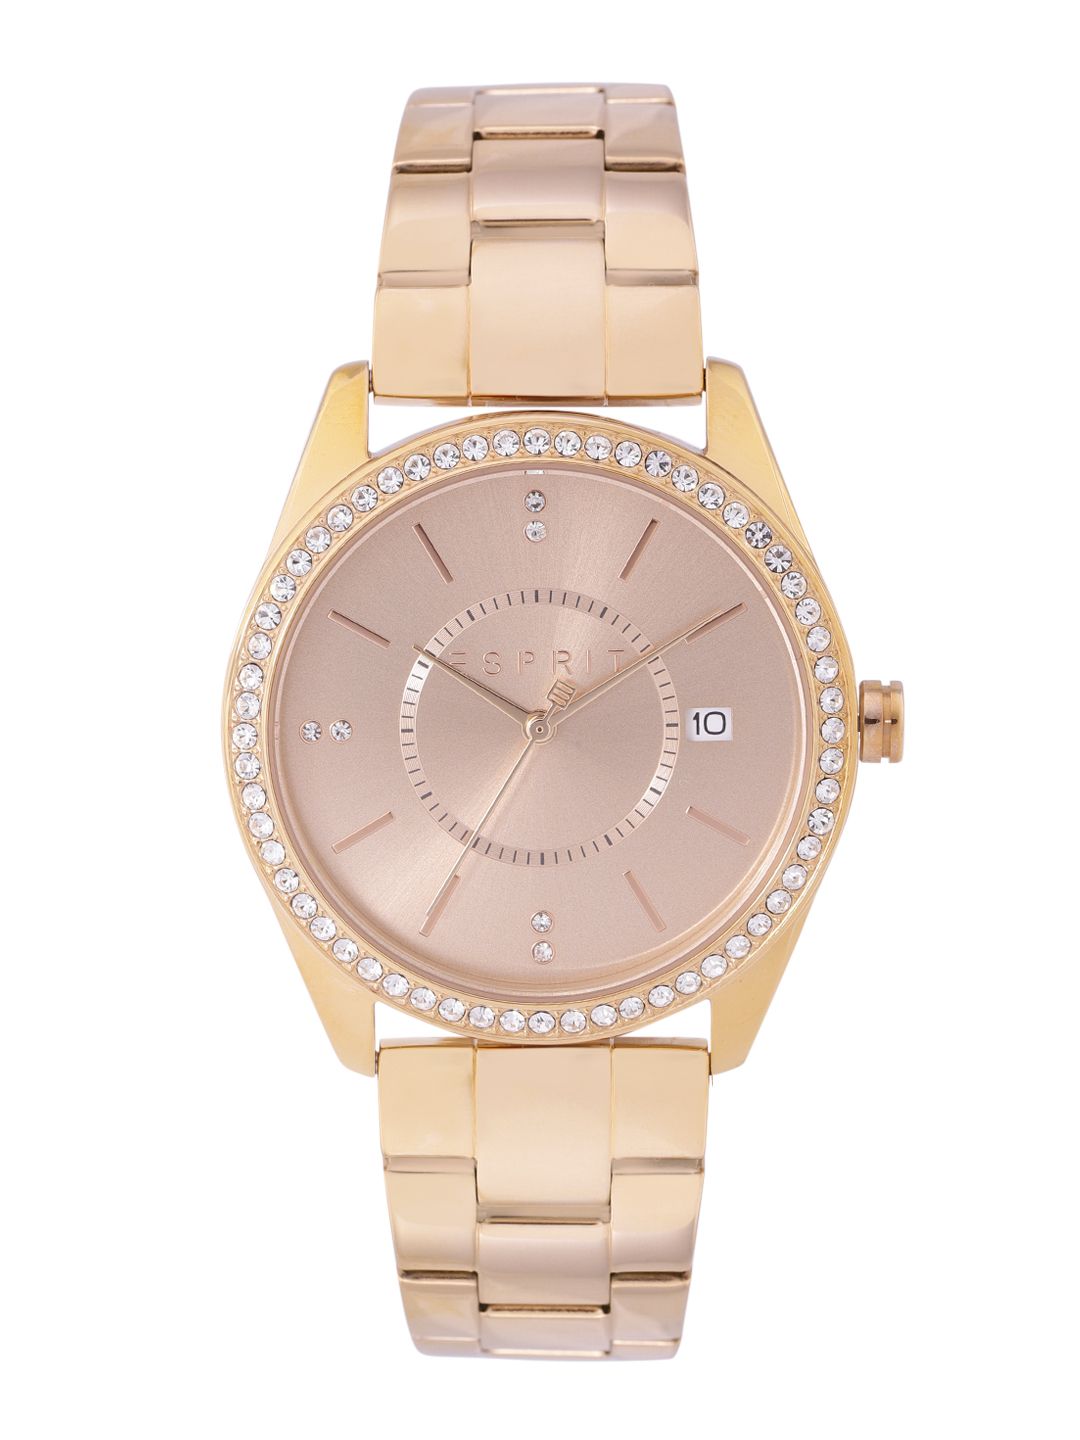 ESPRIT Women Rose Gold-Toned Dial & Gold Toned Bracelet Analogue Watch ES1L196M0085 Price in India